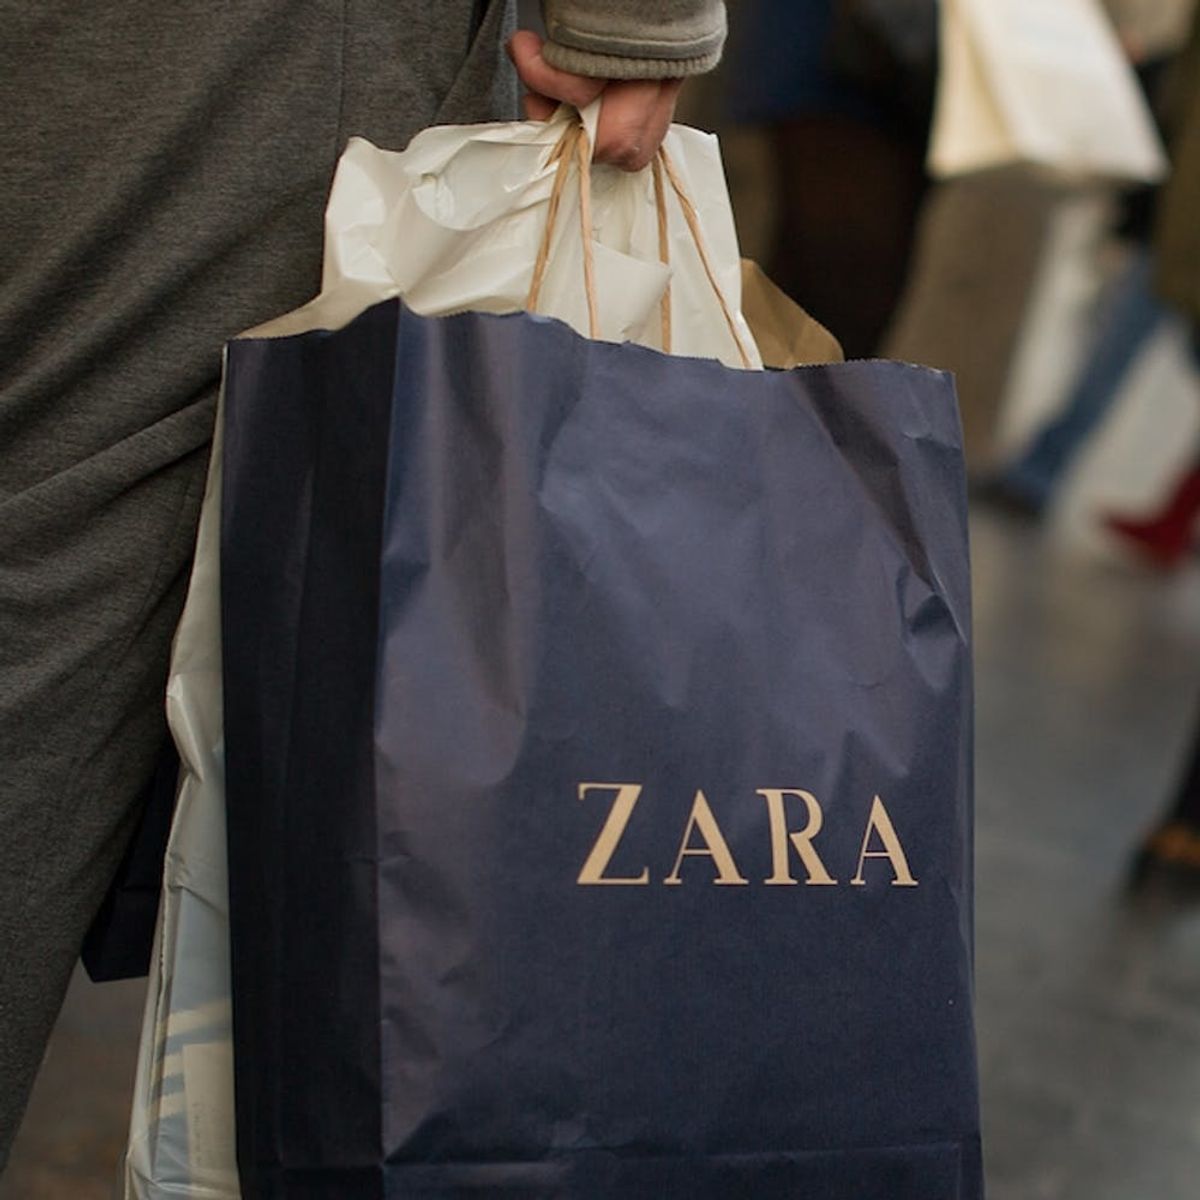 The Best Time to Shop at Zara, According to an Employee